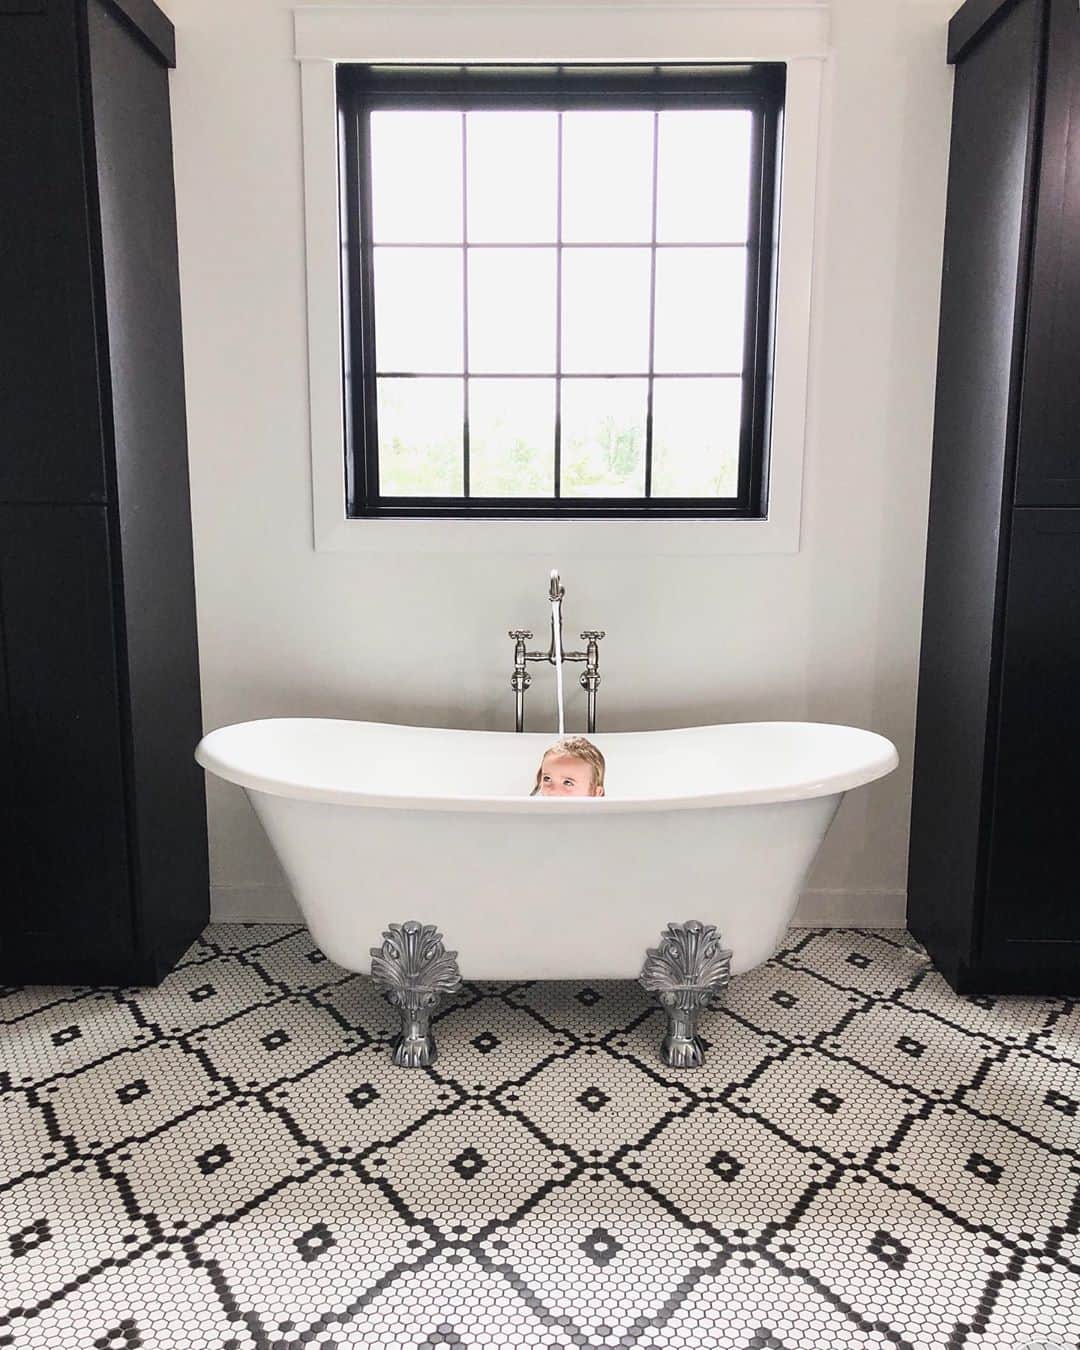 black and white bathroom with face peeking out of the freestanding tub and black picture window directly above